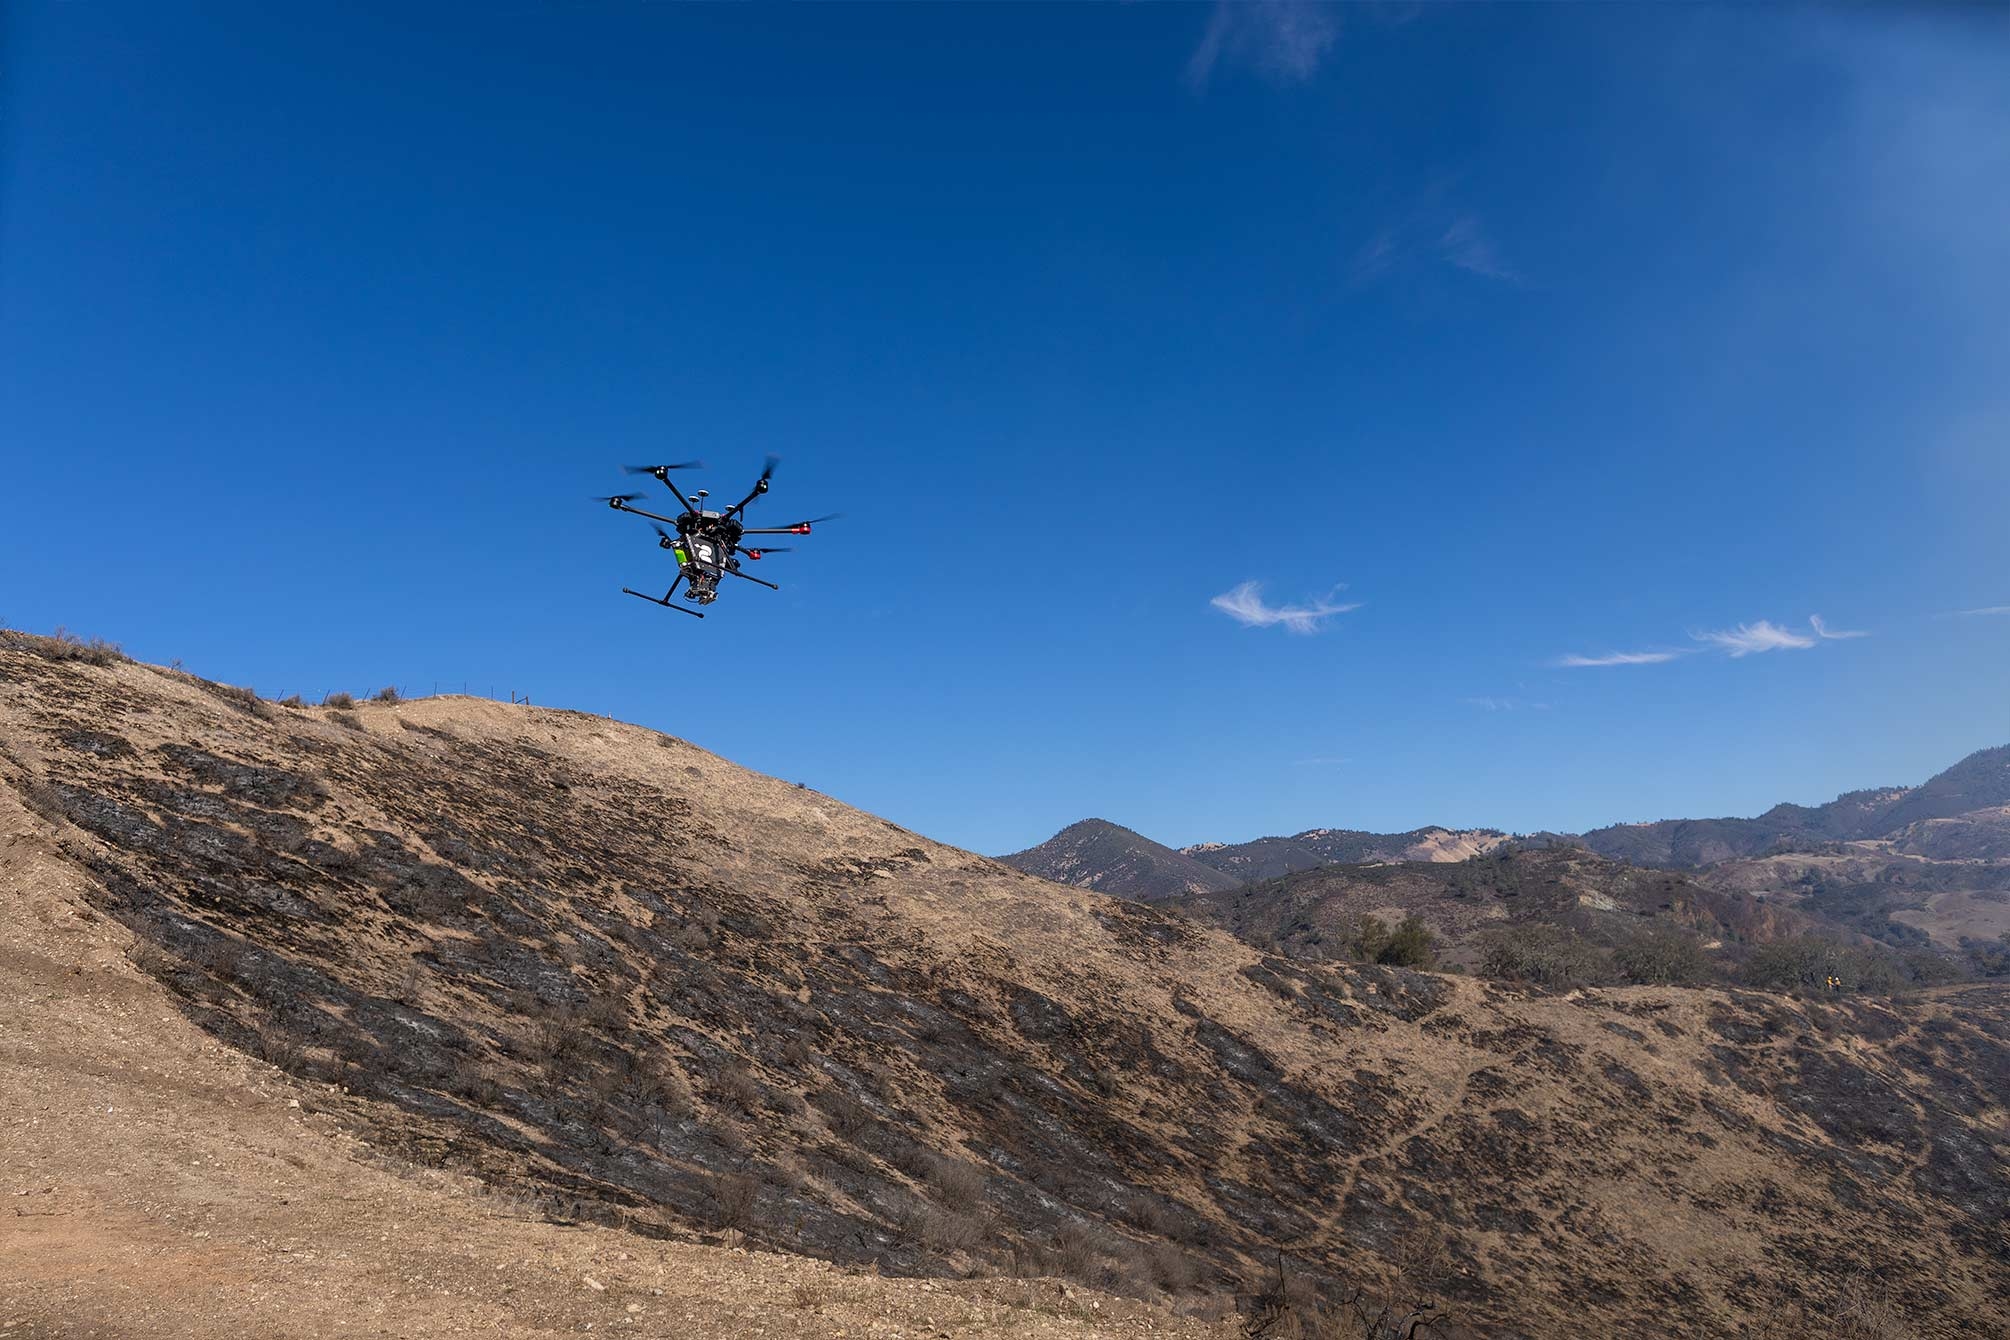 A hexacopter takes off into the blue sky above a scorched hillside.